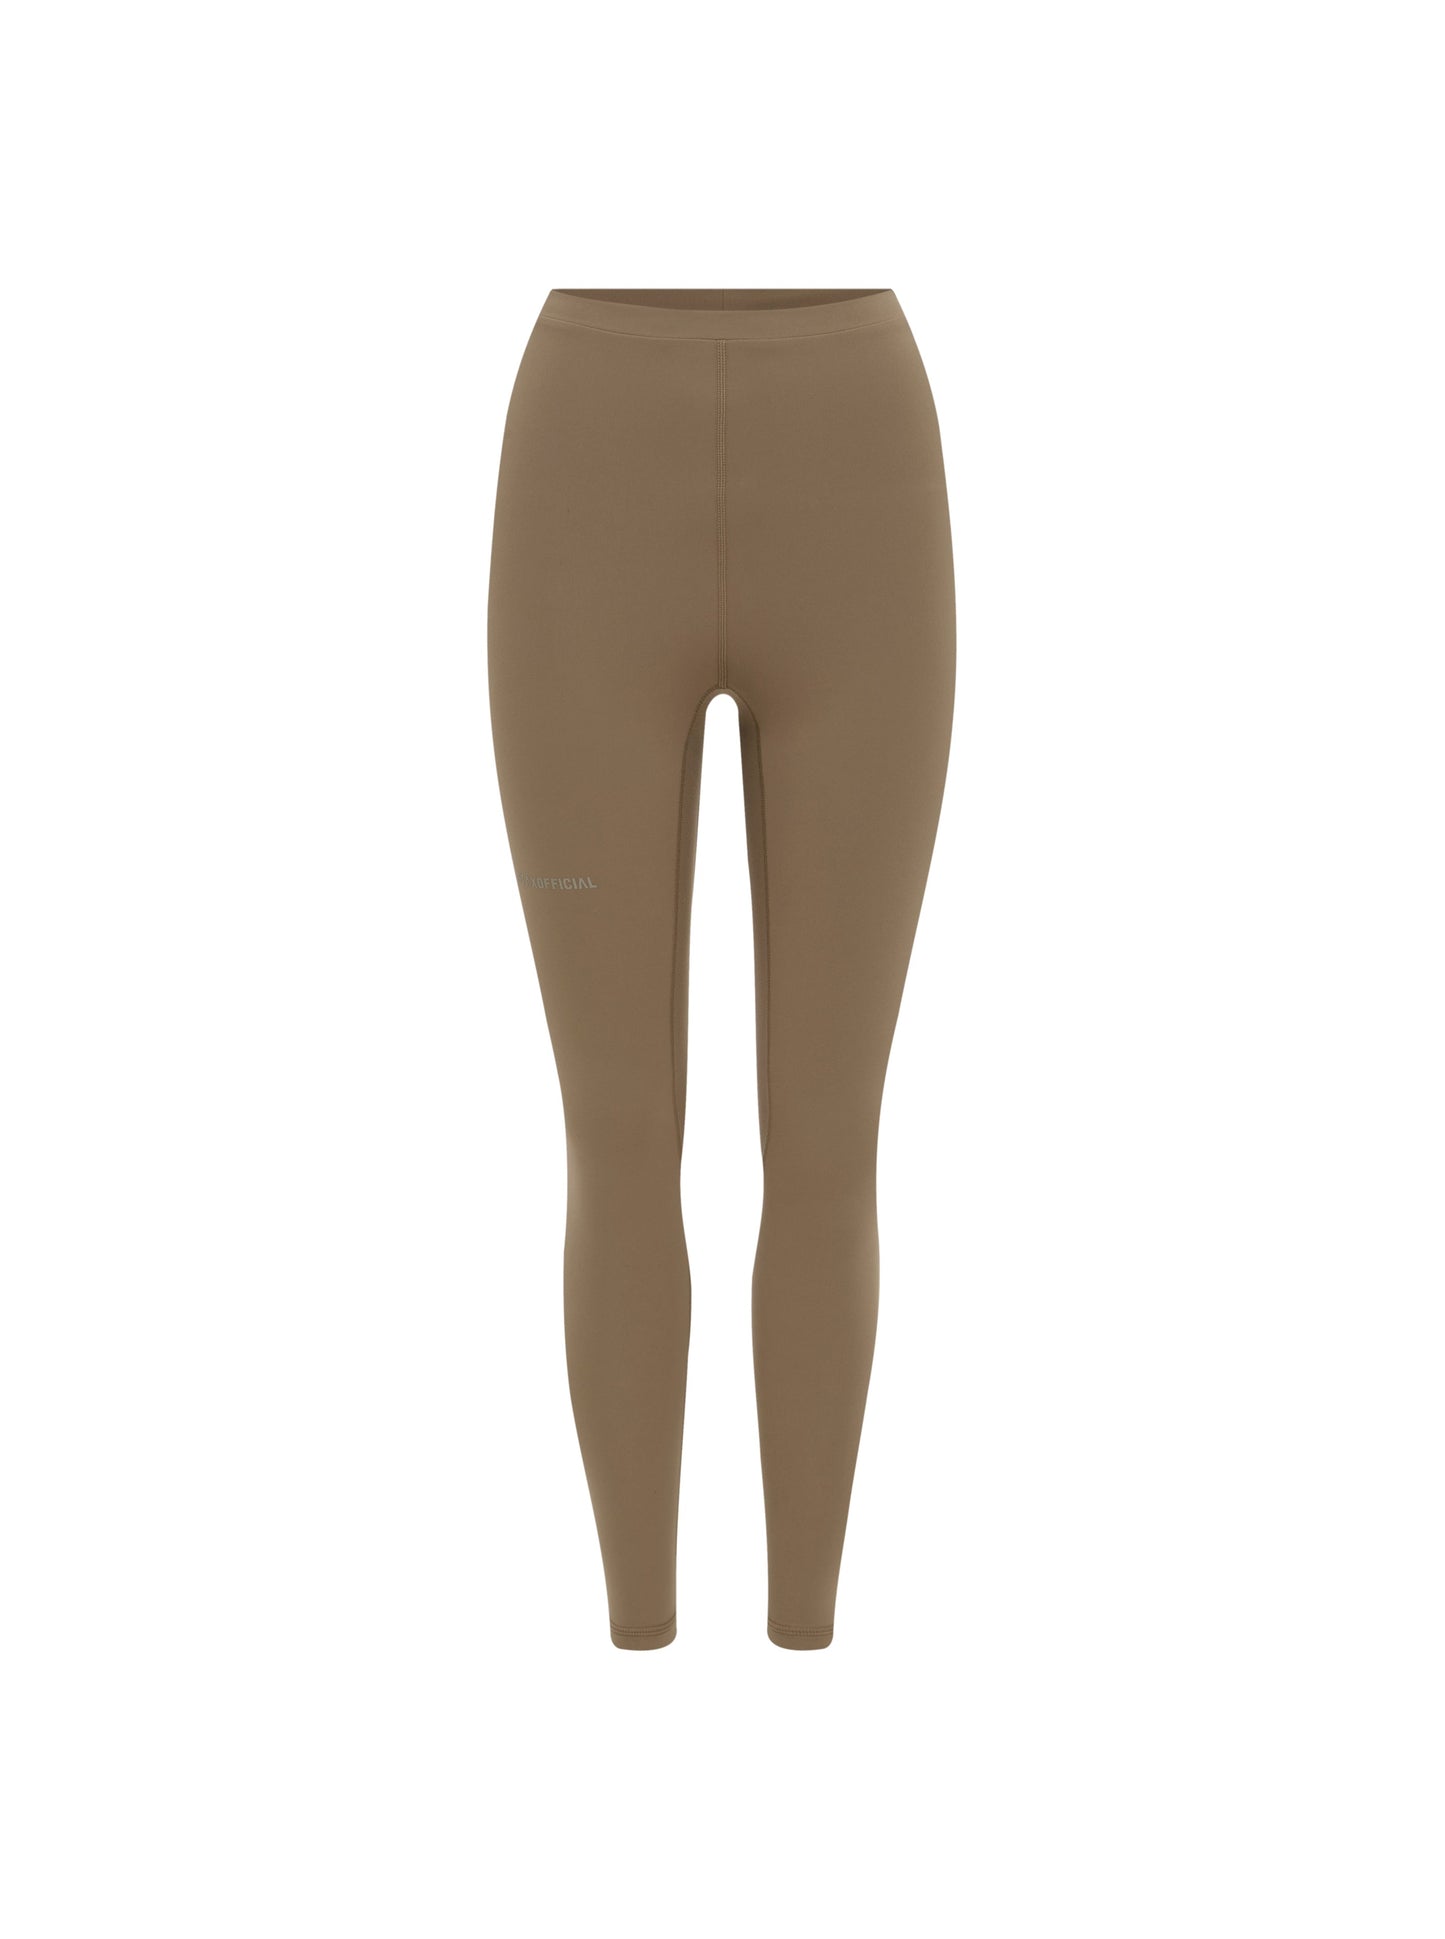 AW Poppy Full Length Tights- Tuscan (Brown)